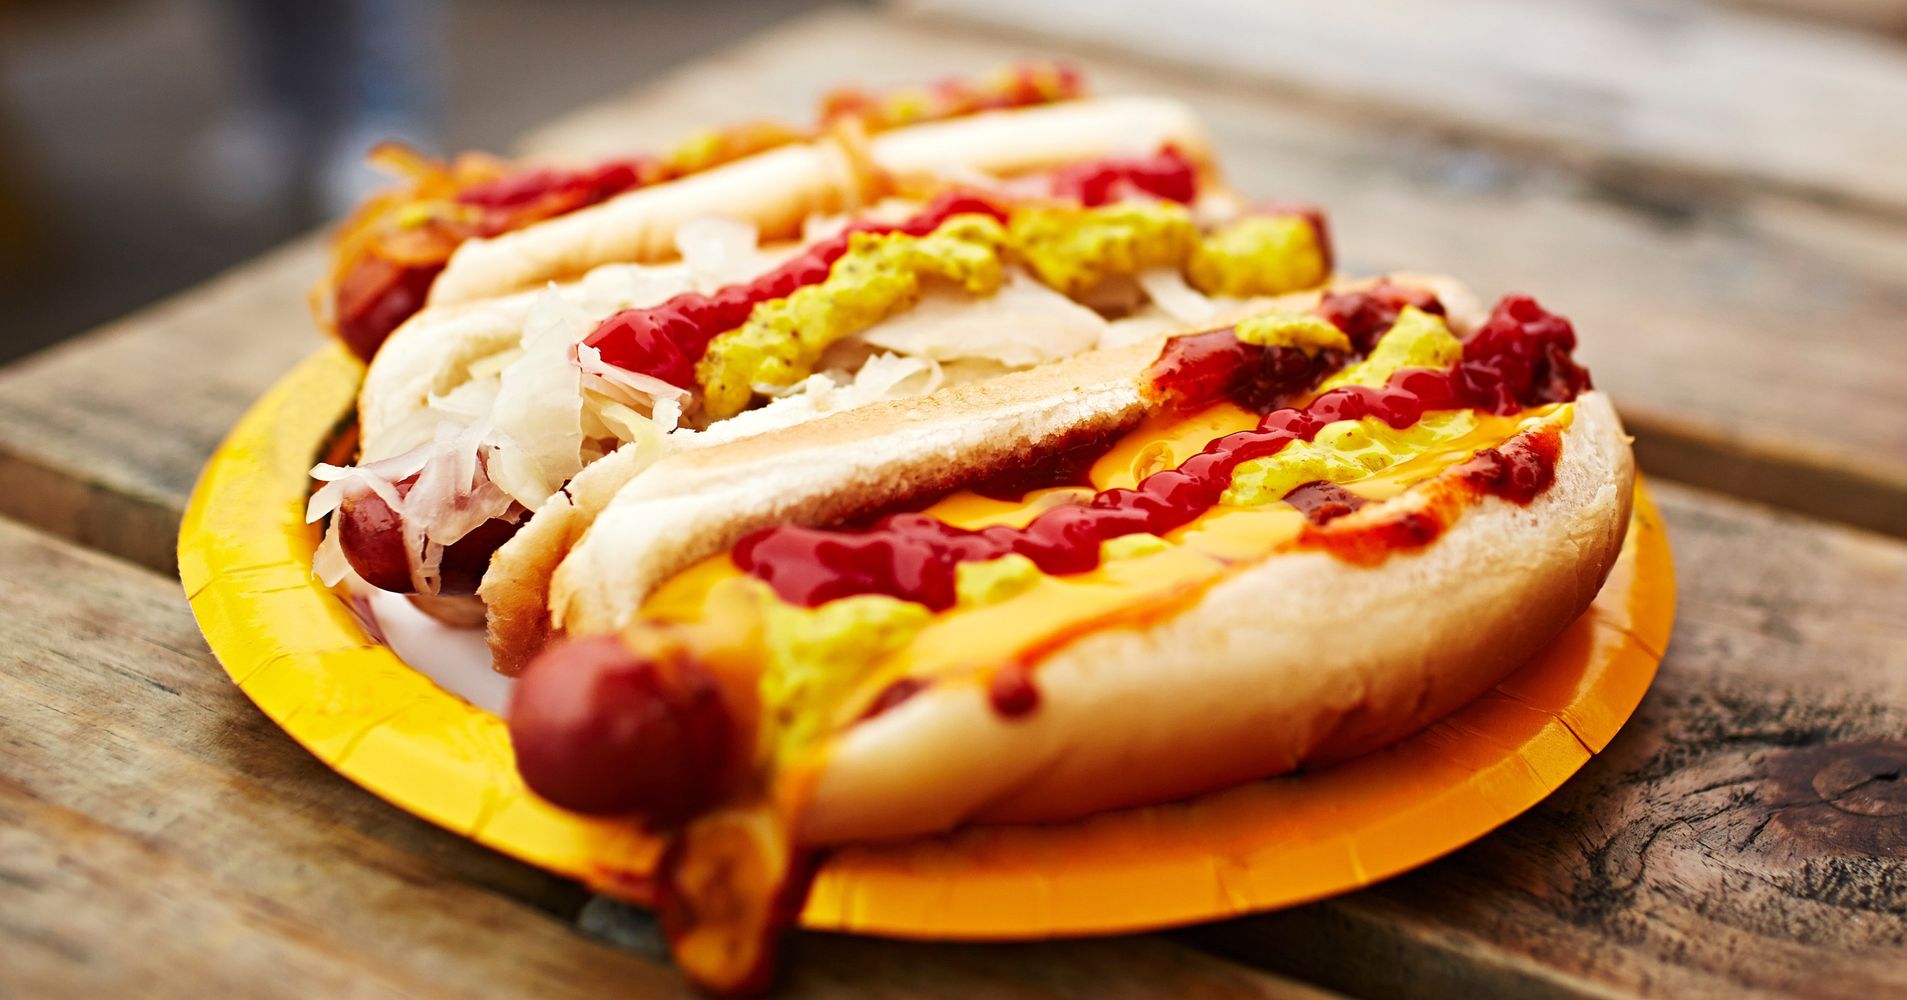 Here's Where To Get A Free Hot Dog On National Hot Dog Day, July 23